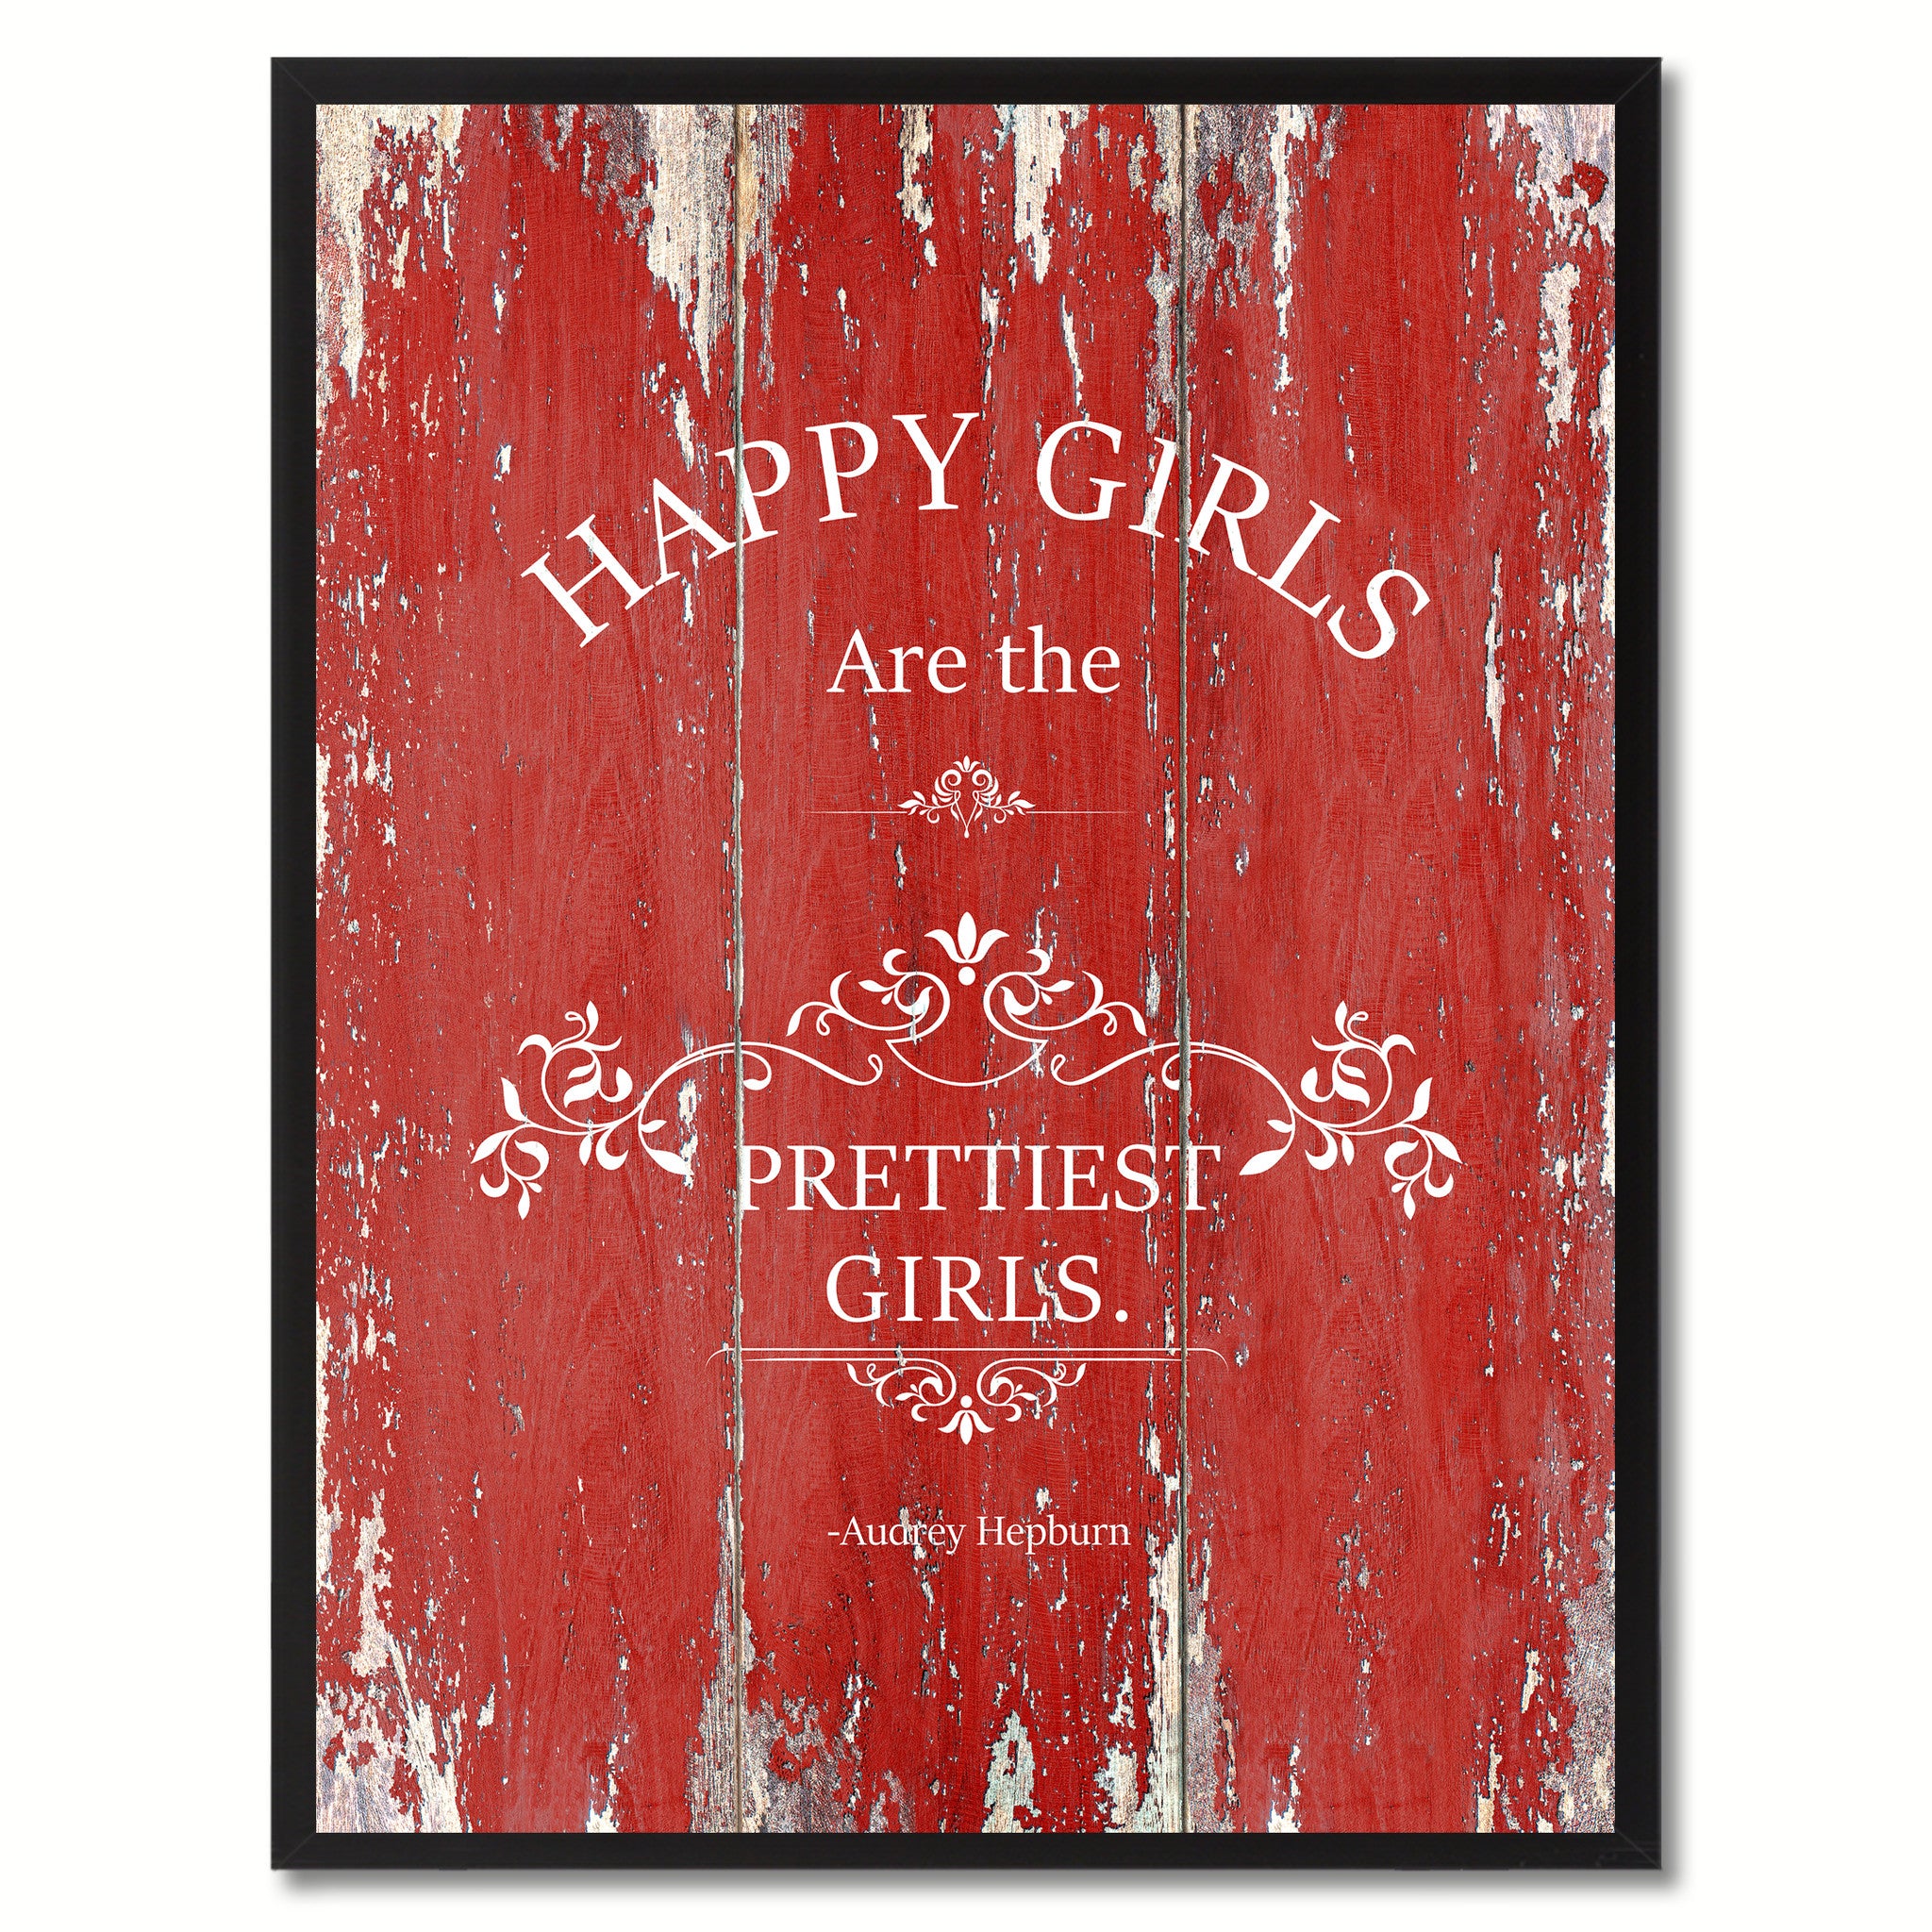 Happy girls are the prettiest girls - Audrey Hepburn Vintage Saying Gifts Home Decor Wall Art Canvas Print with Custom Picture Frame, Red